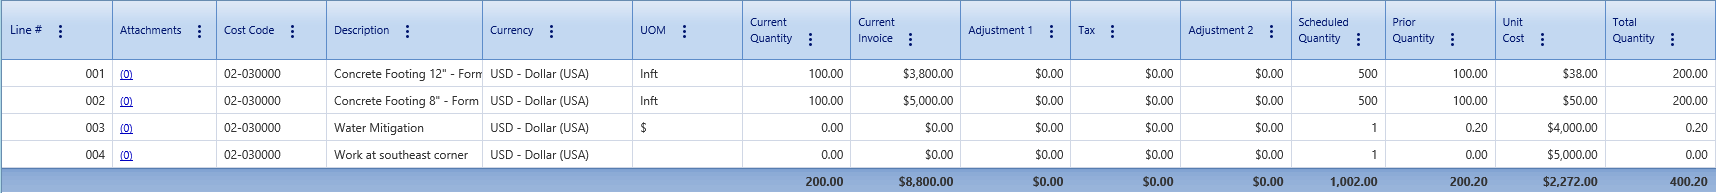 4. Progress Invoices Details Tab Table